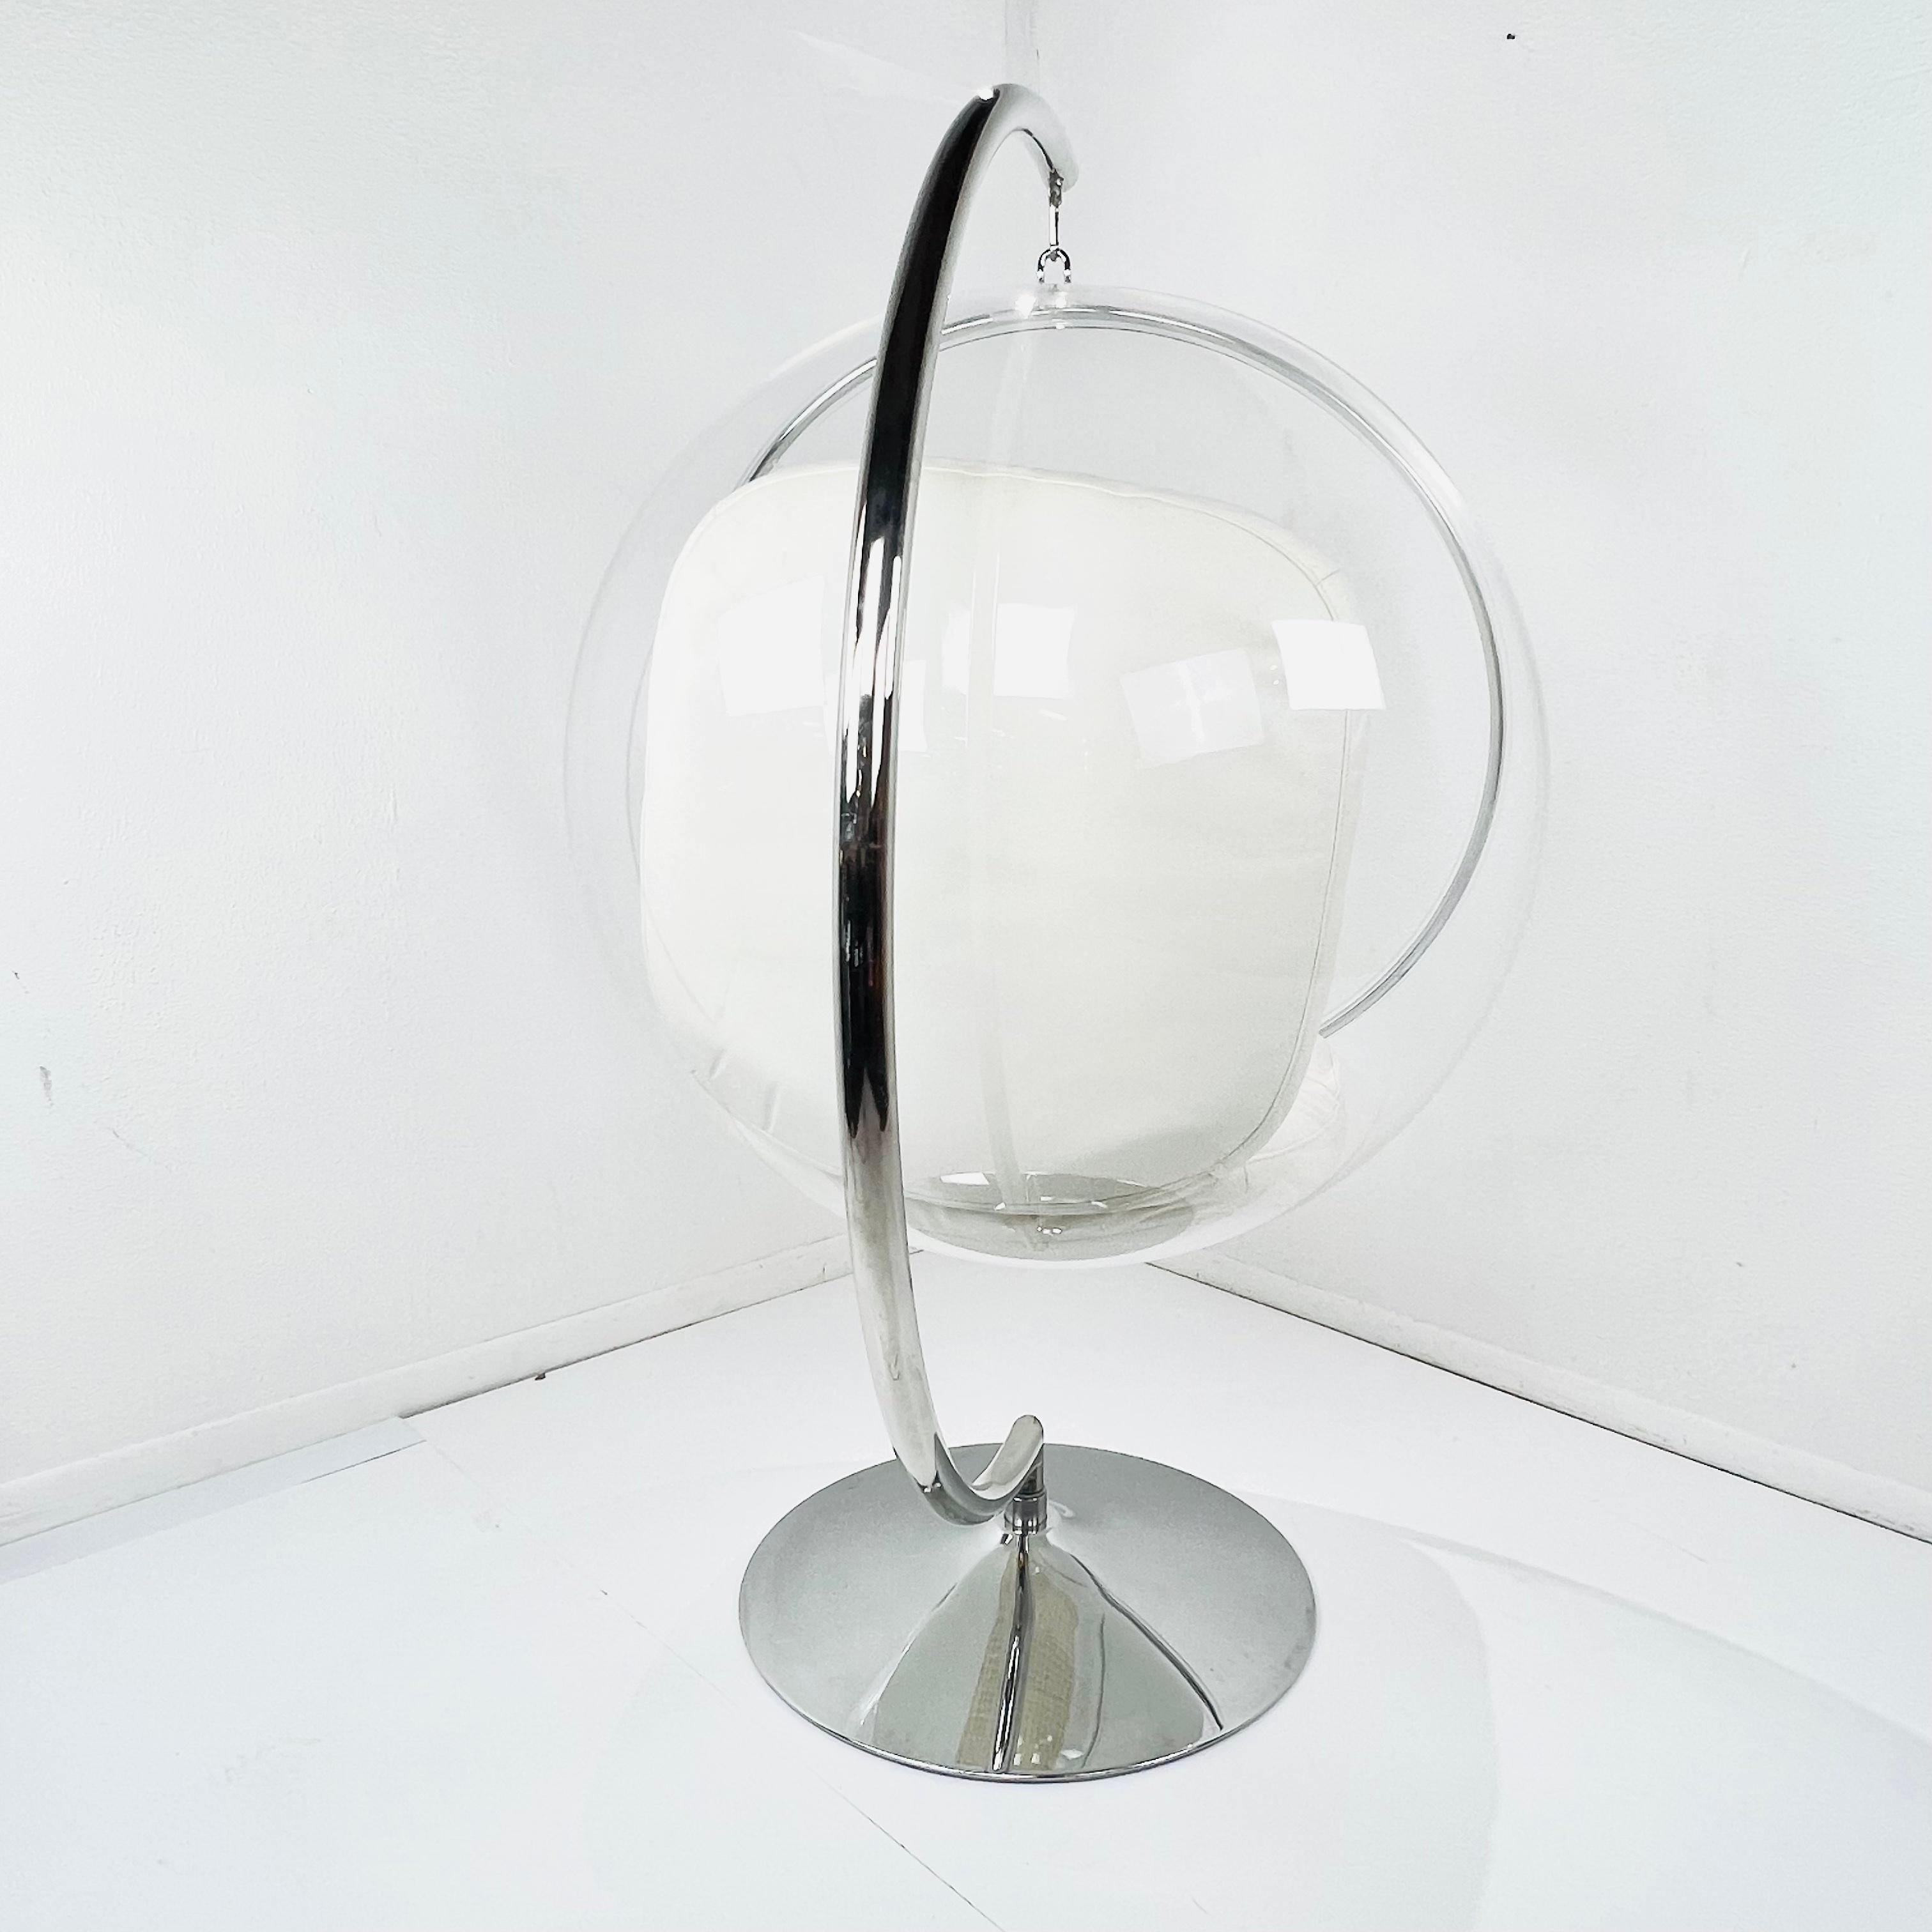 20th Century Eero Aarnio Suspended Lucite Bubble Chair For Sale